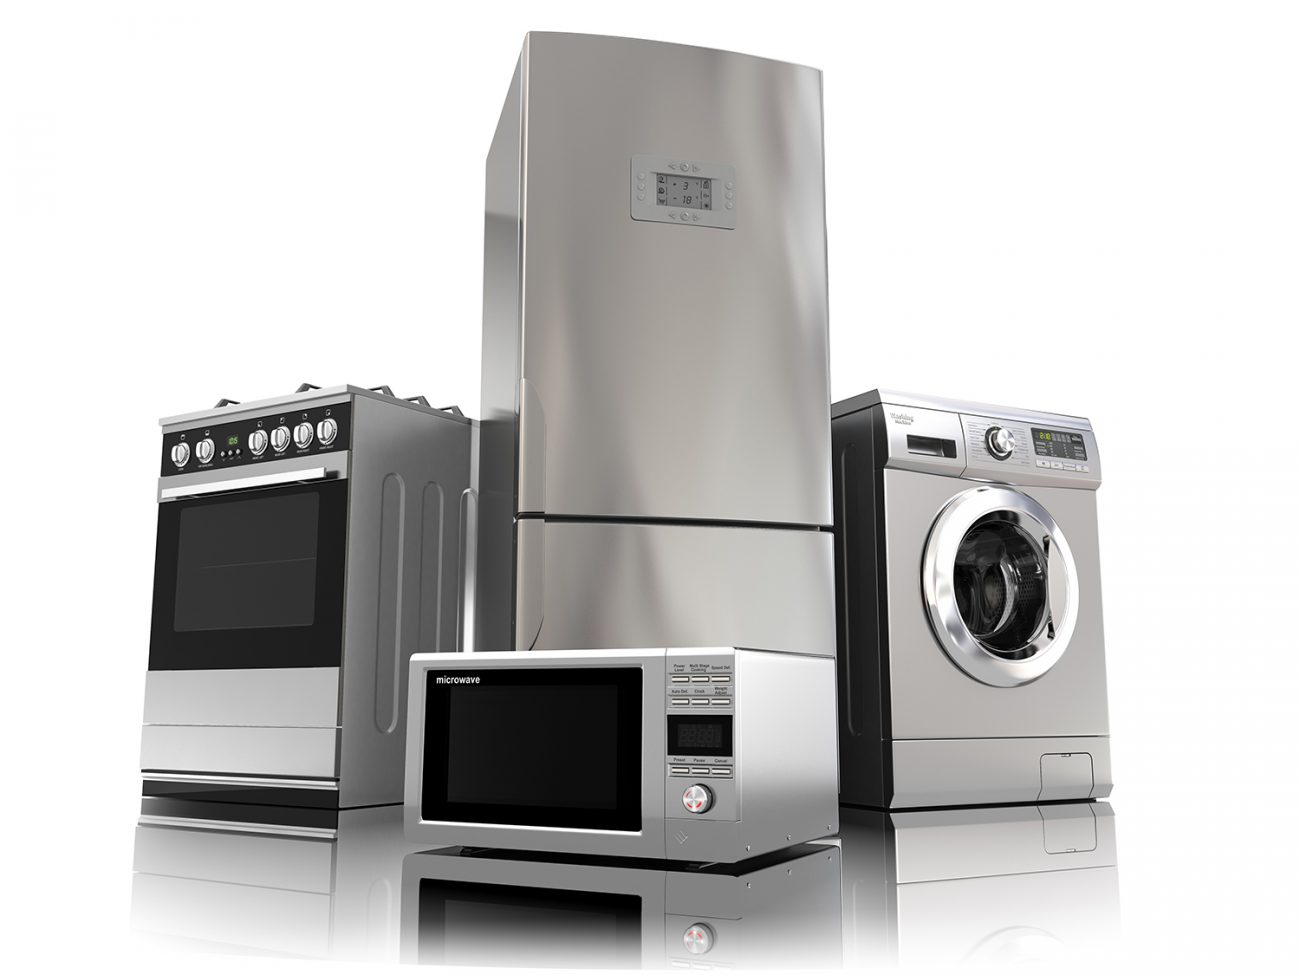 The best appliances for your Colorado home from Specialty Appliance